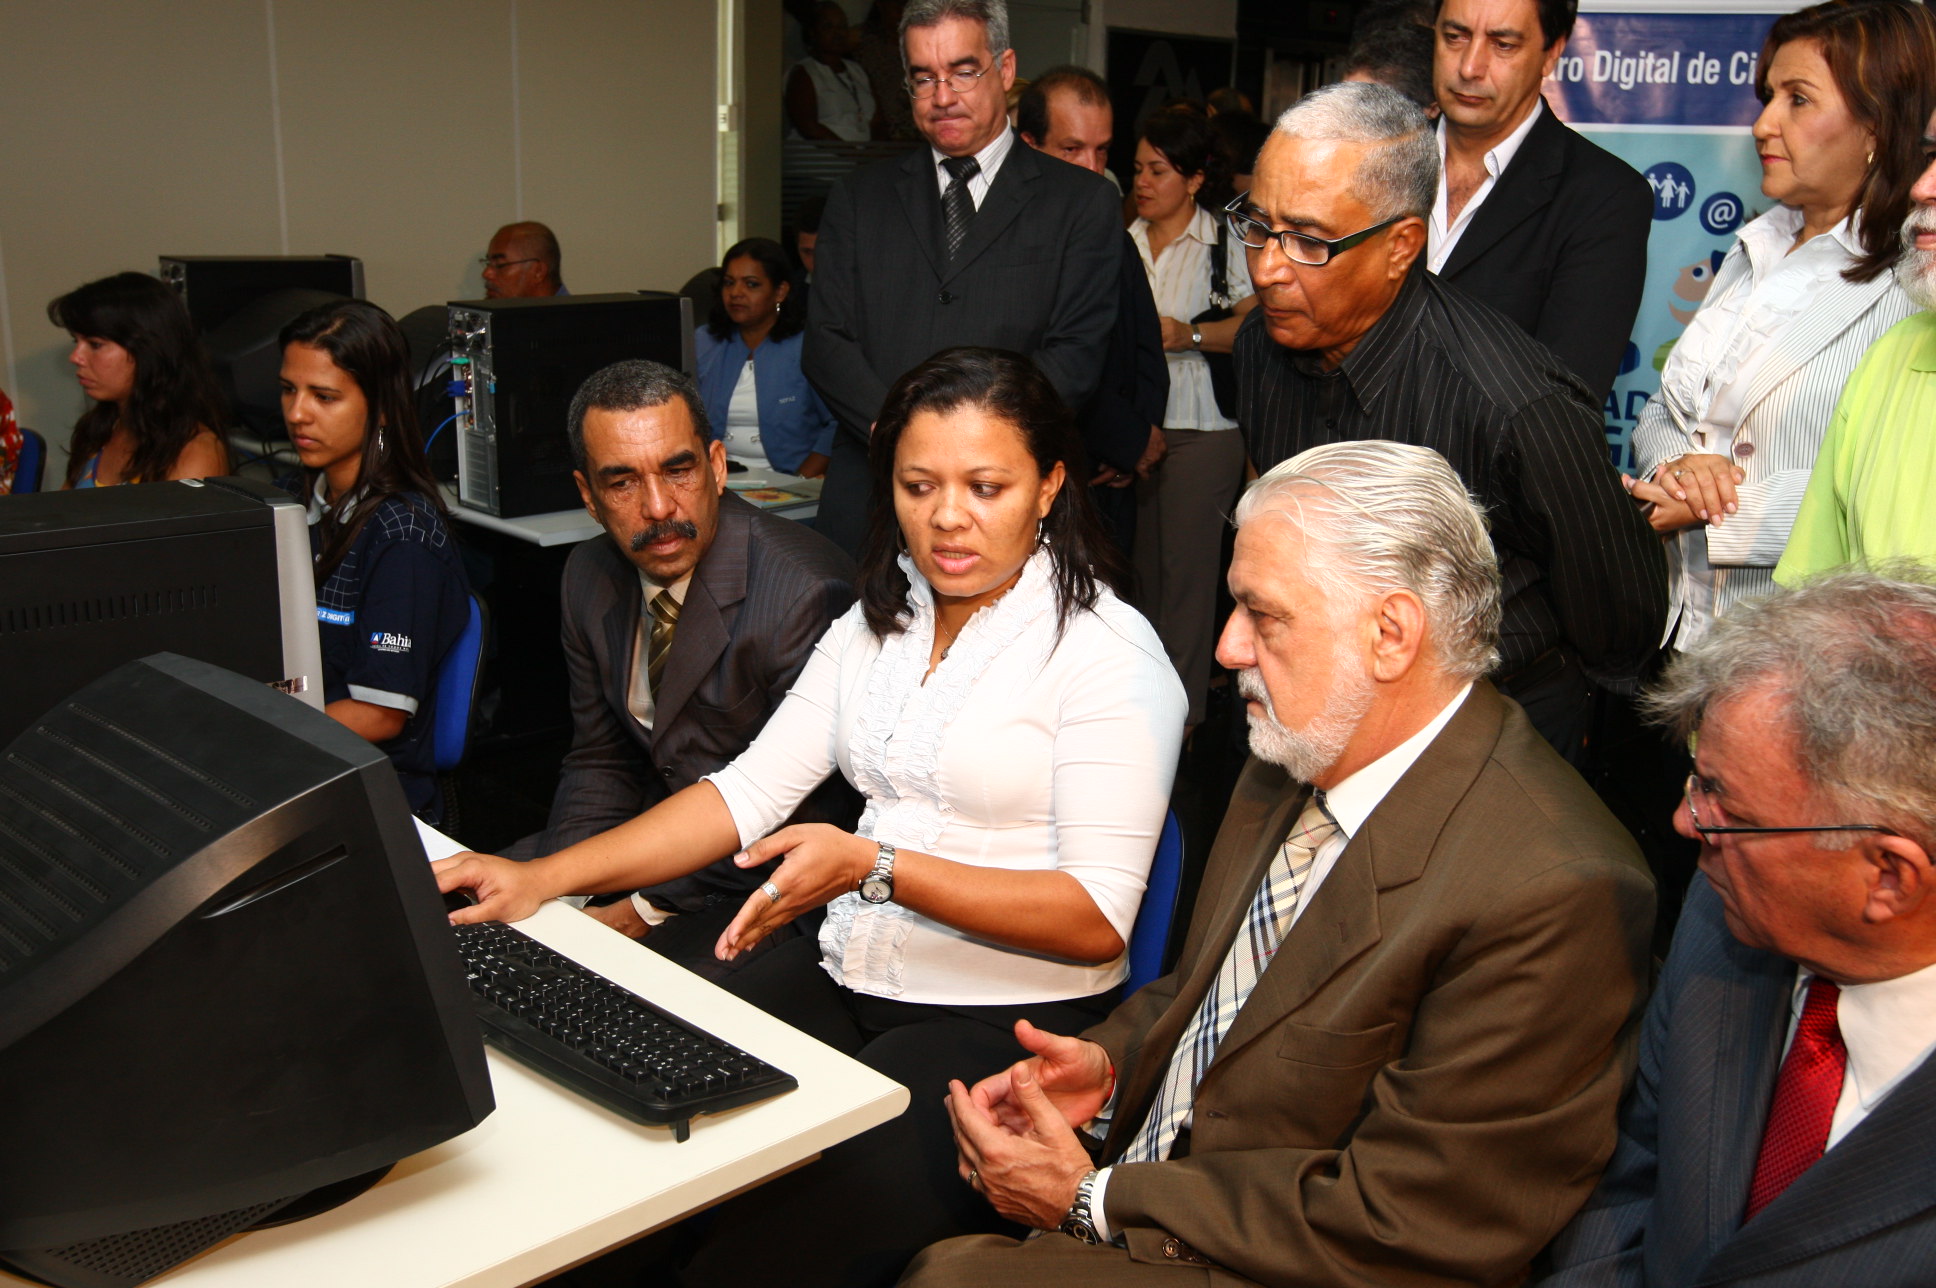 a group of people in front of computers and an older person pointing